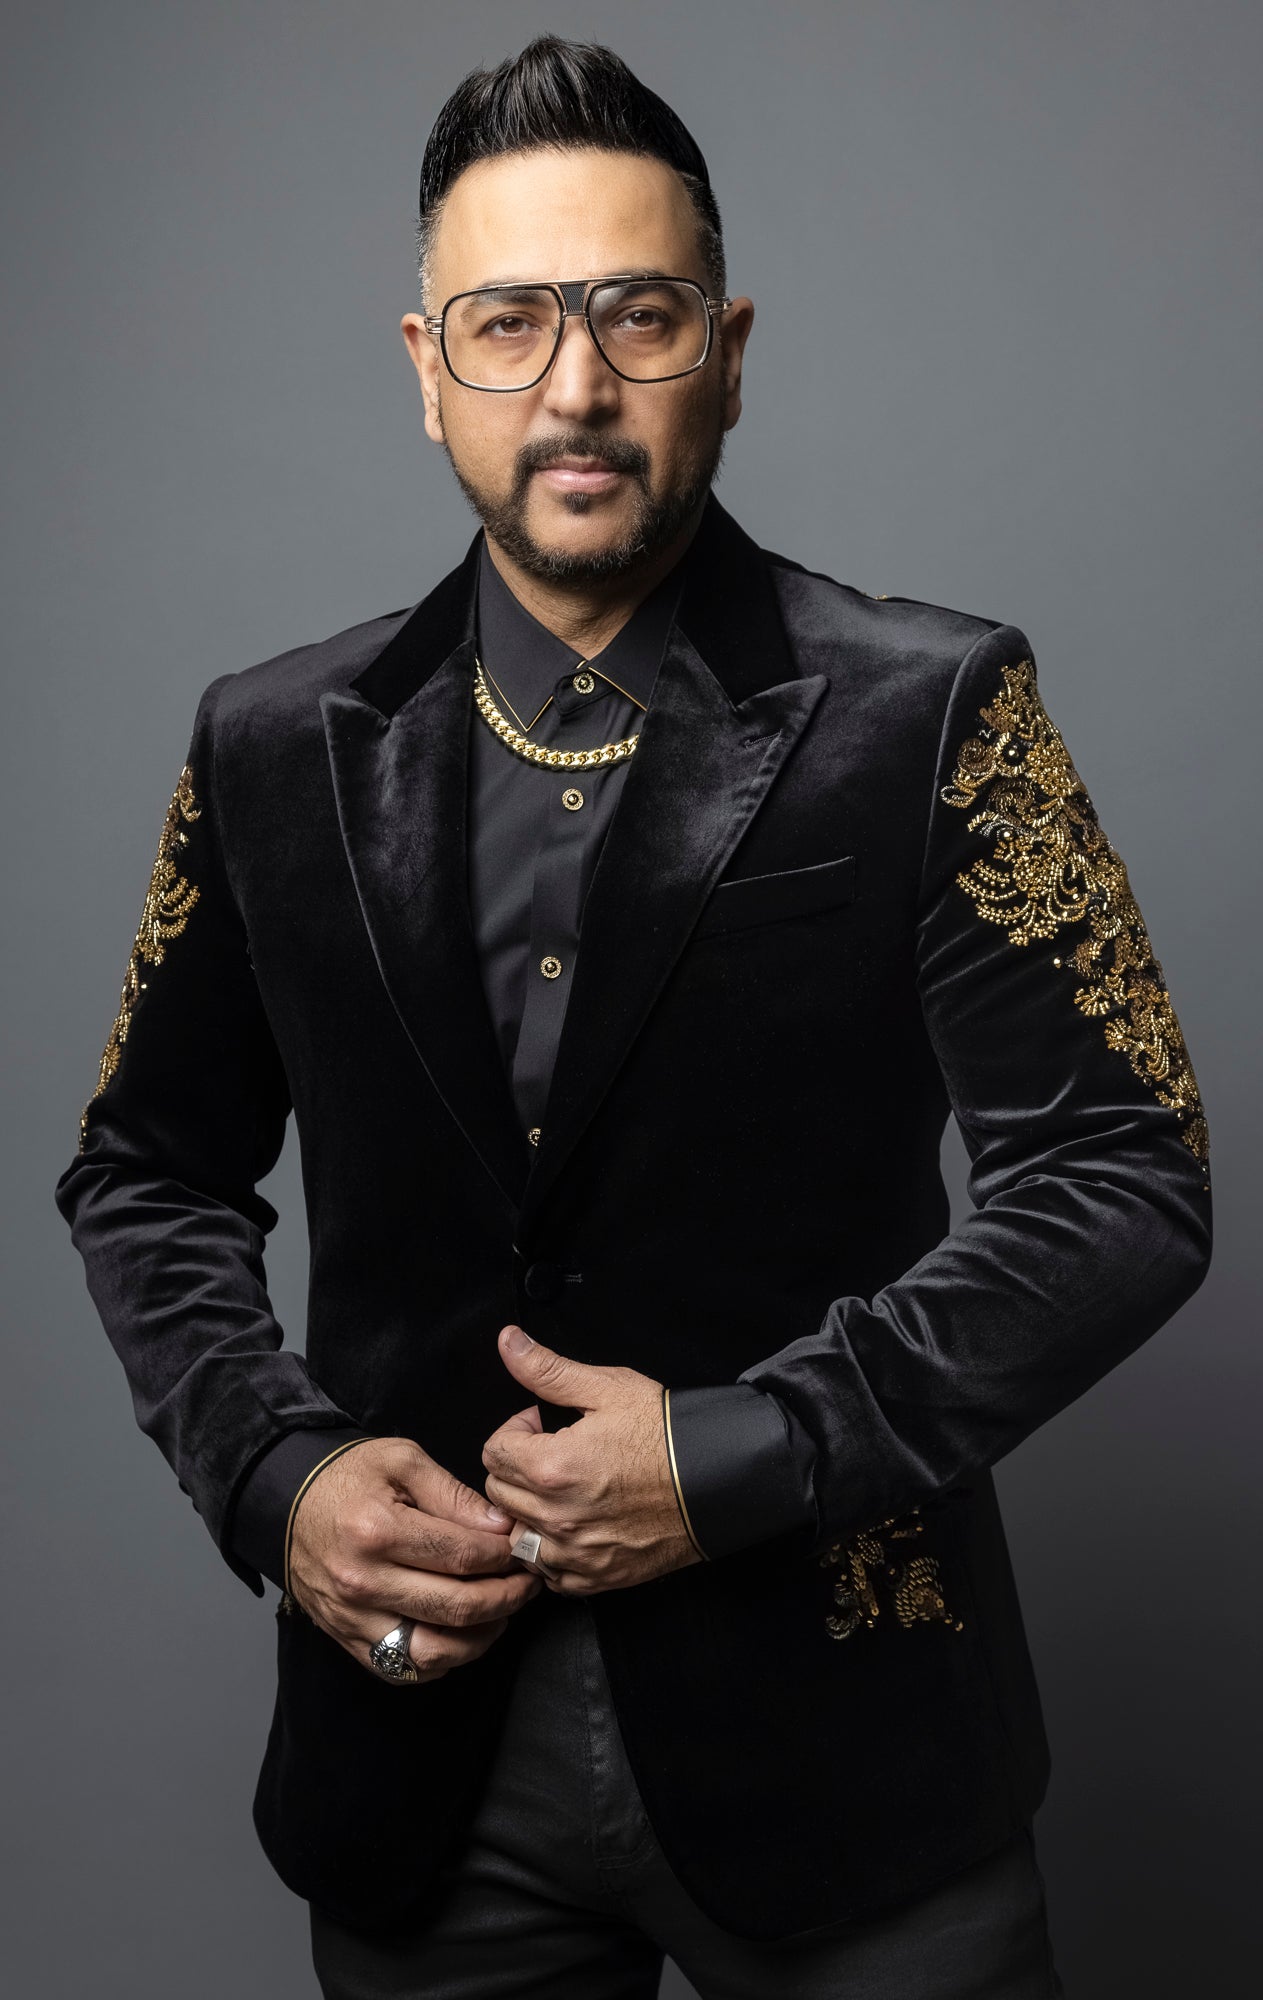  luxurious suit boasts a Sequin and Beads Velvet design, as well as a peak lapel collar and long sleevesLuxury black blazer boasts gold Sequin and Beads, Velvet design, as well as a peak lapel collar and long sleeves